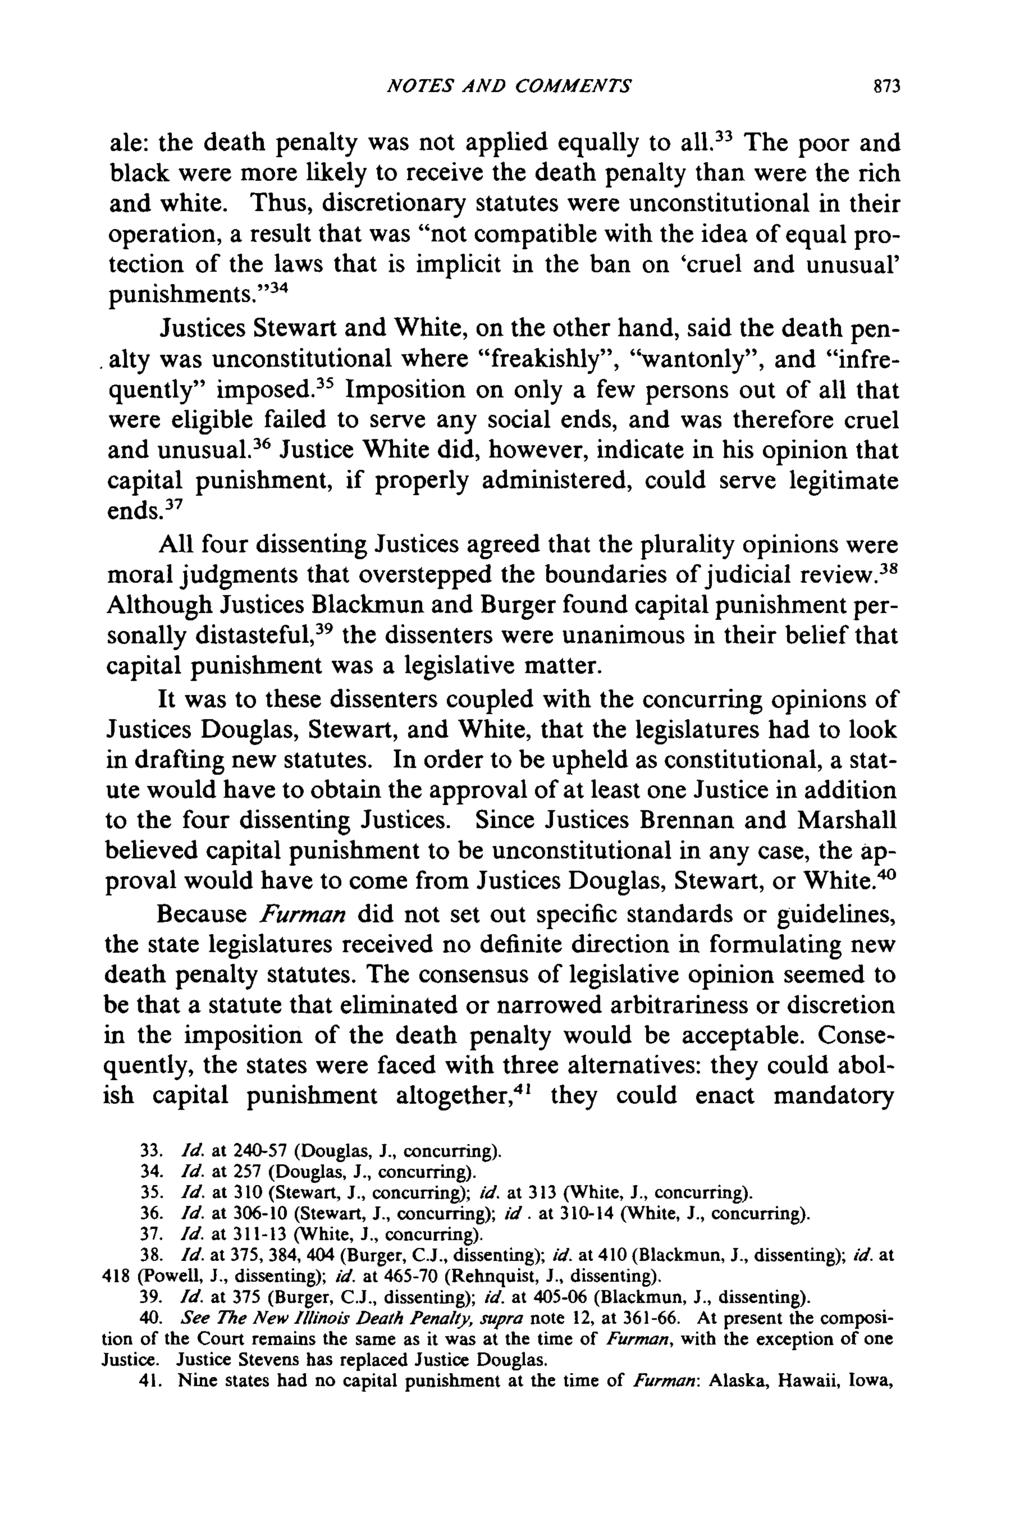 NOTES AND COMMENTS ale: the death penalty was not applied equally to all. 33 The poor and black were more likely to receive the death penalty than were the rich and white.